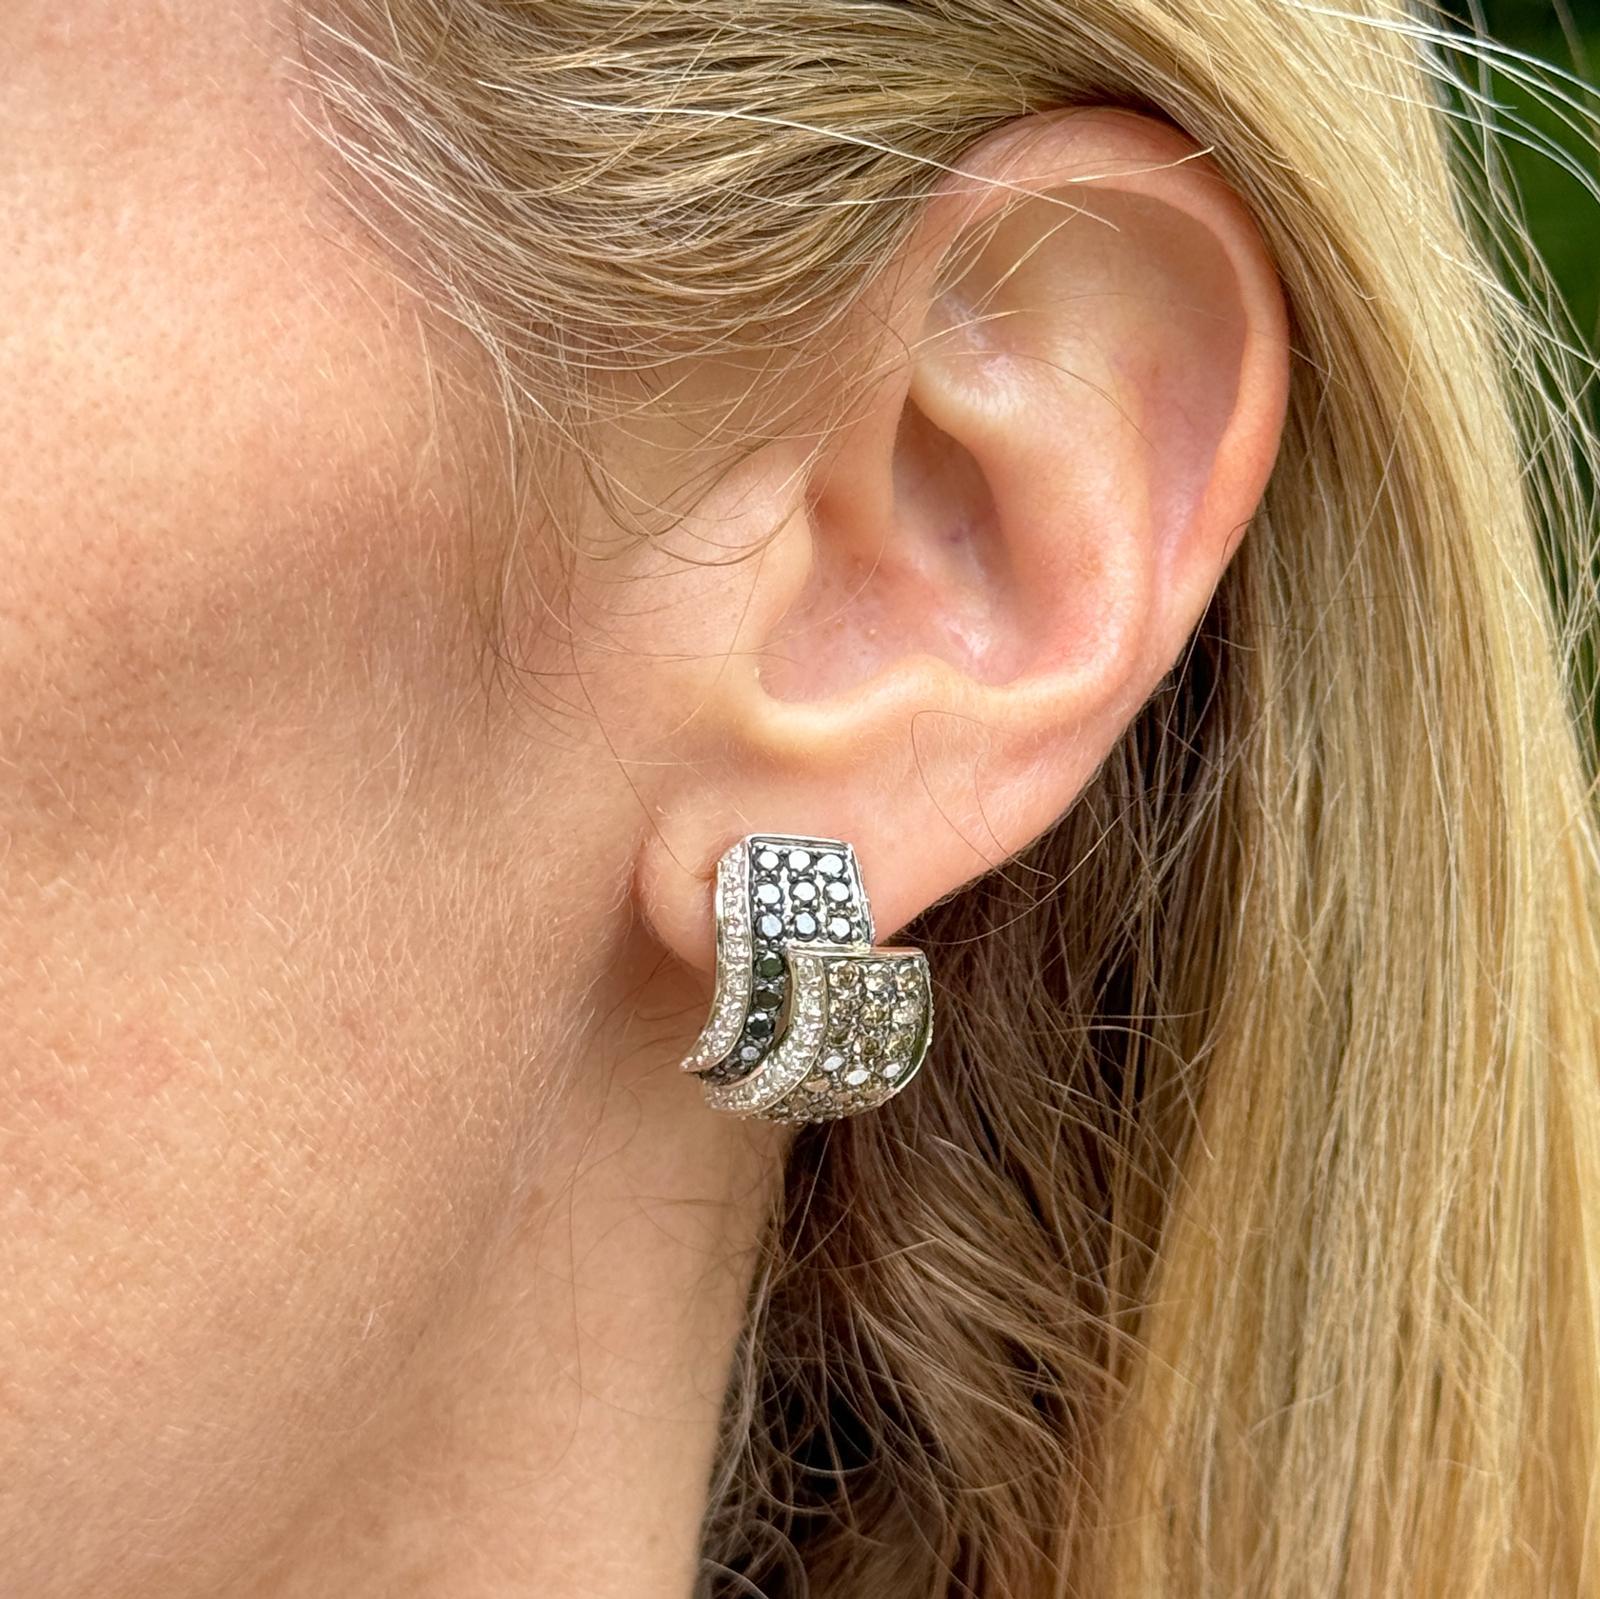 The modern black, white, and champagne diamond earrings set in 14 karat yellow gold are a contemporary accessory that exudes elegance and sophistication.
These earrings feature a combination of black, white, and champagne diamonds weighing